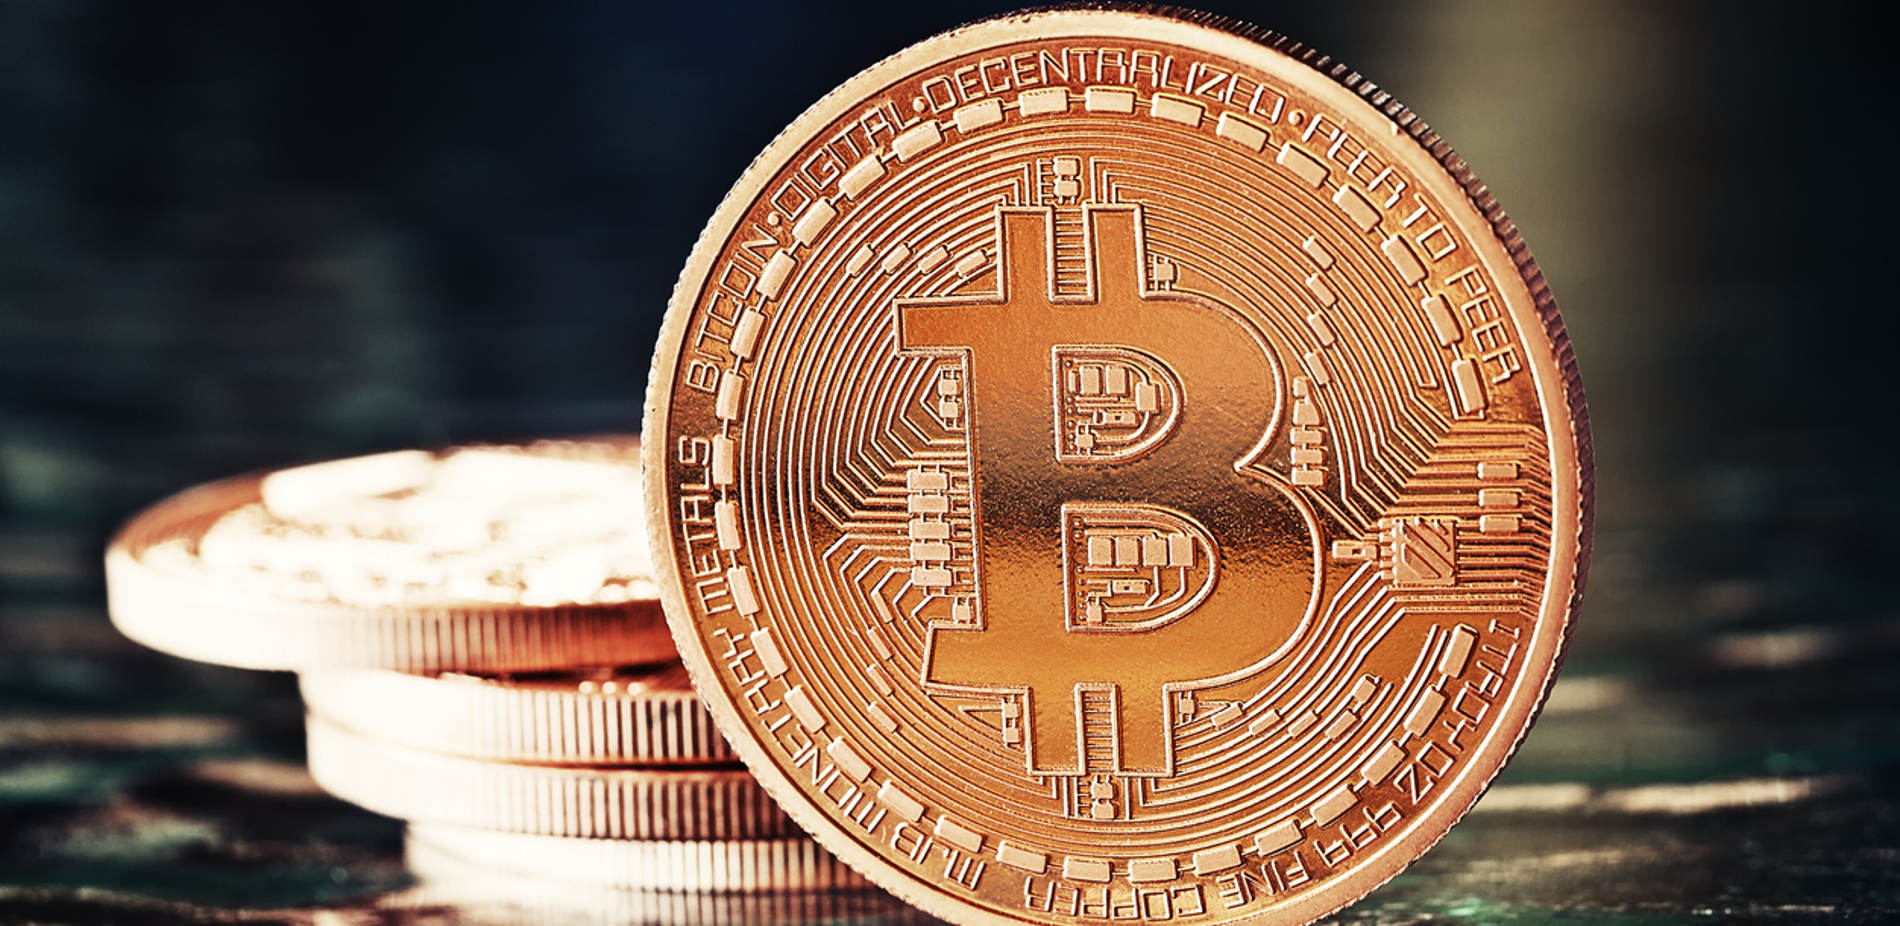 Bitcoin Price: Is It Now Time to Give Up on Bitcoin?